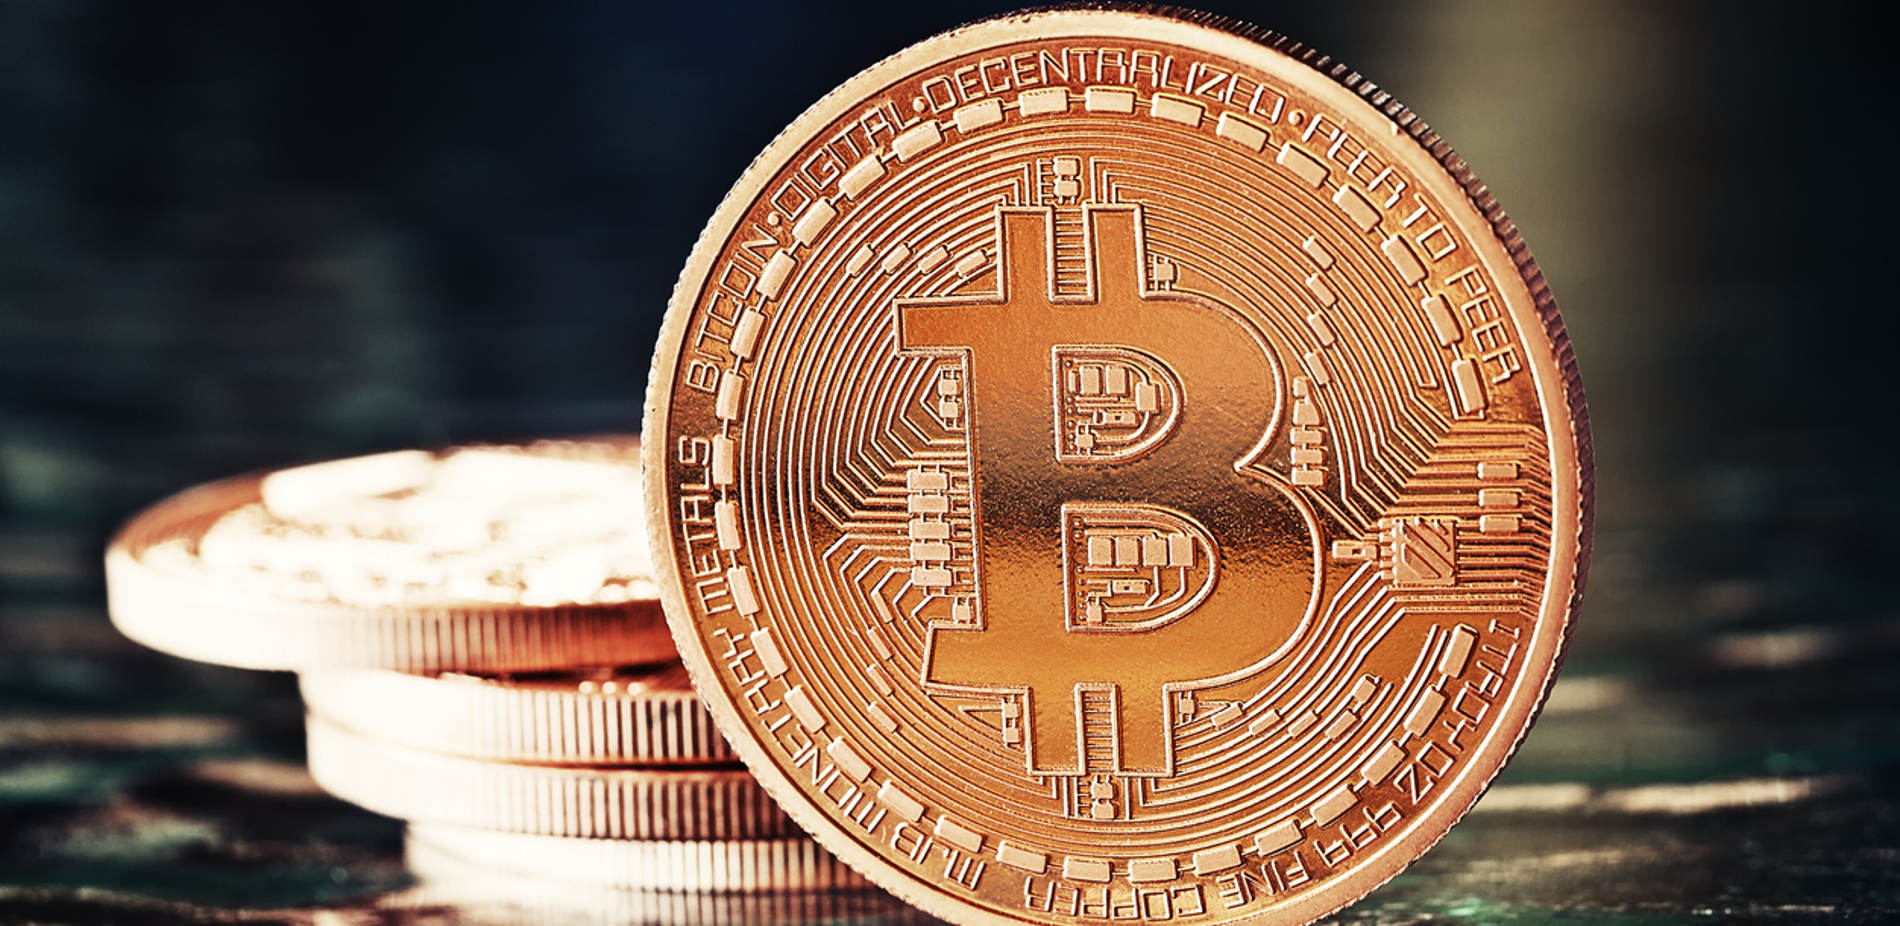 Bitcoin Price: Is It Now Time to Give Up on Bitcoin?